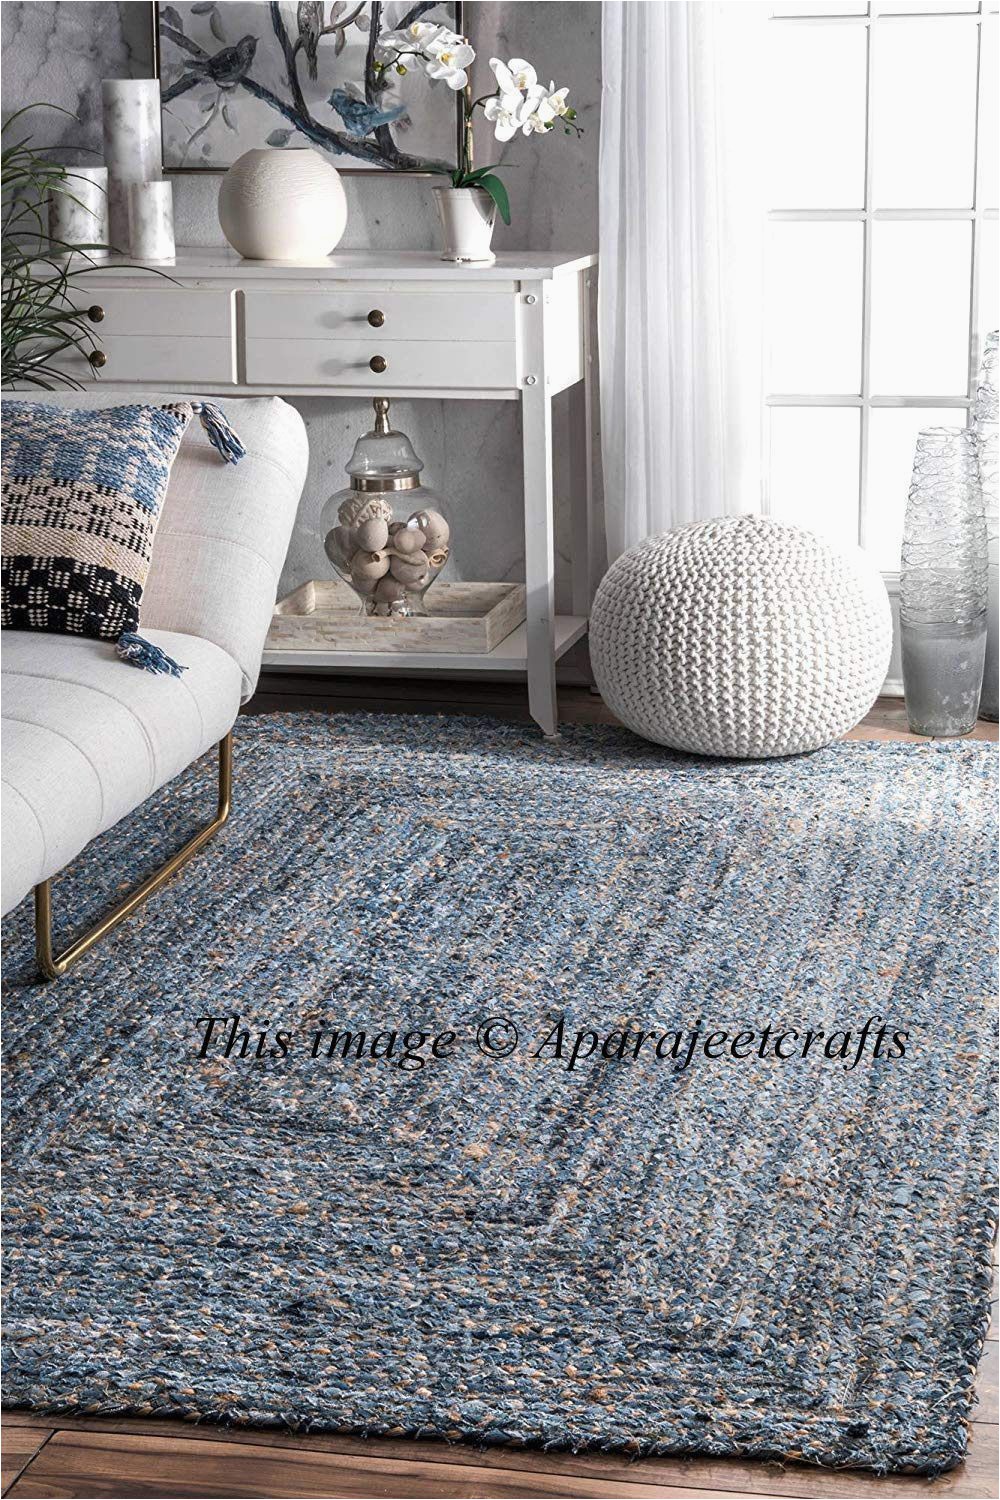 Does Floor and Decor Have area Rugs This Item is Unavailable